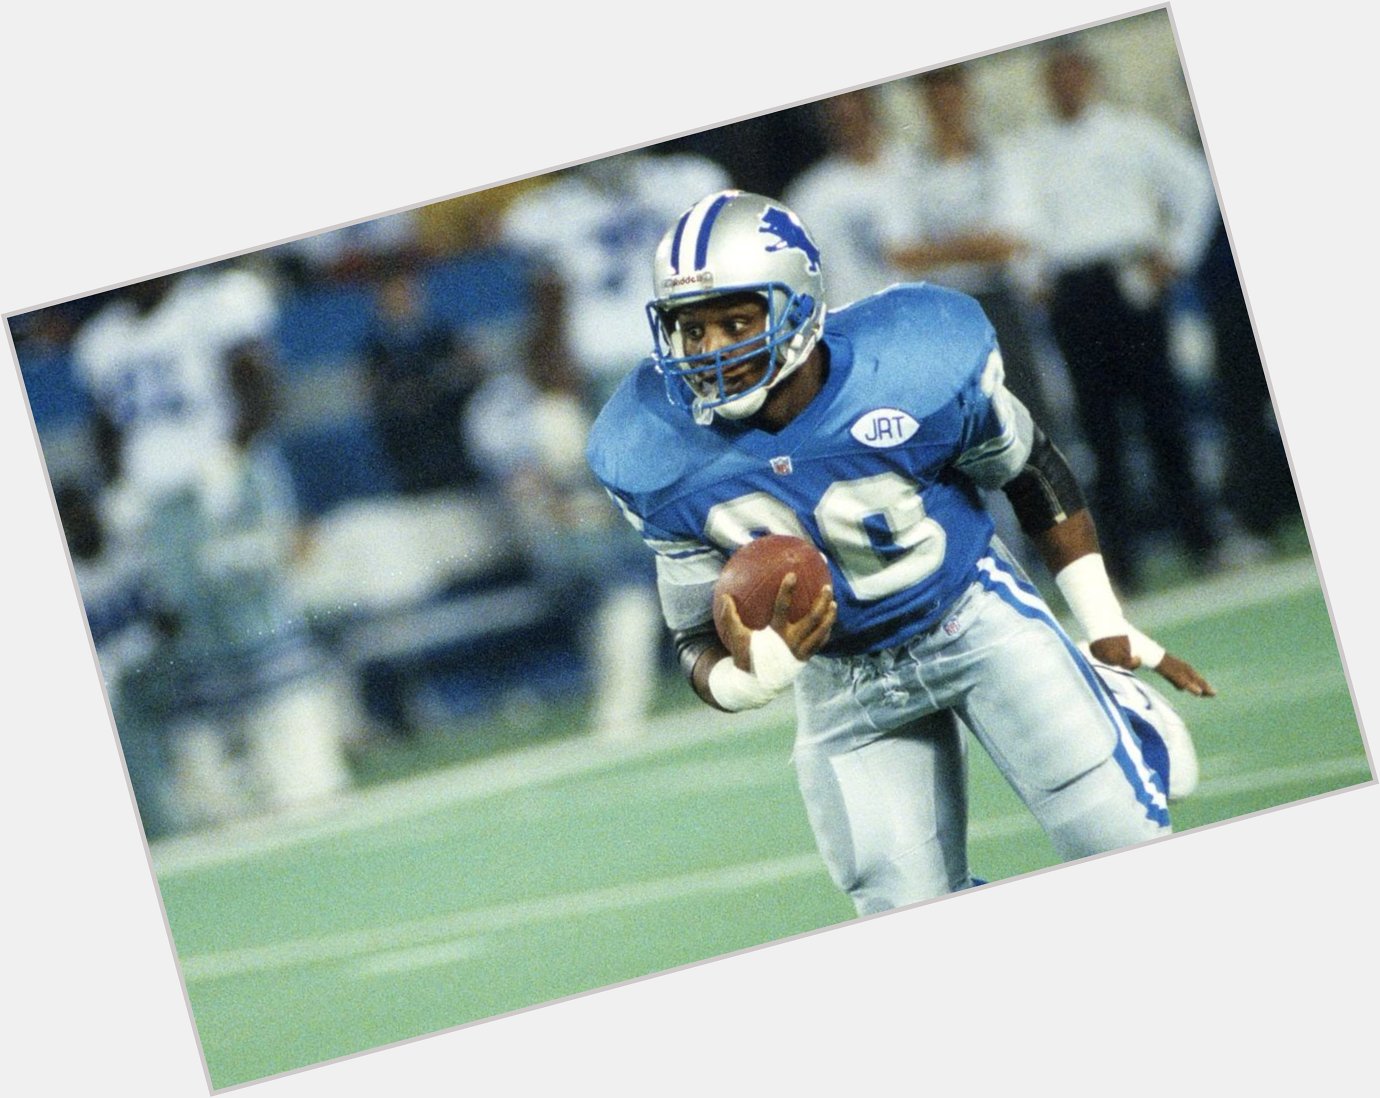 HAPPY BIRTHDAY TO THE GREATEST RUNNING BACK OF ALL TIME  .BARRY SANDERS!!!!!! 